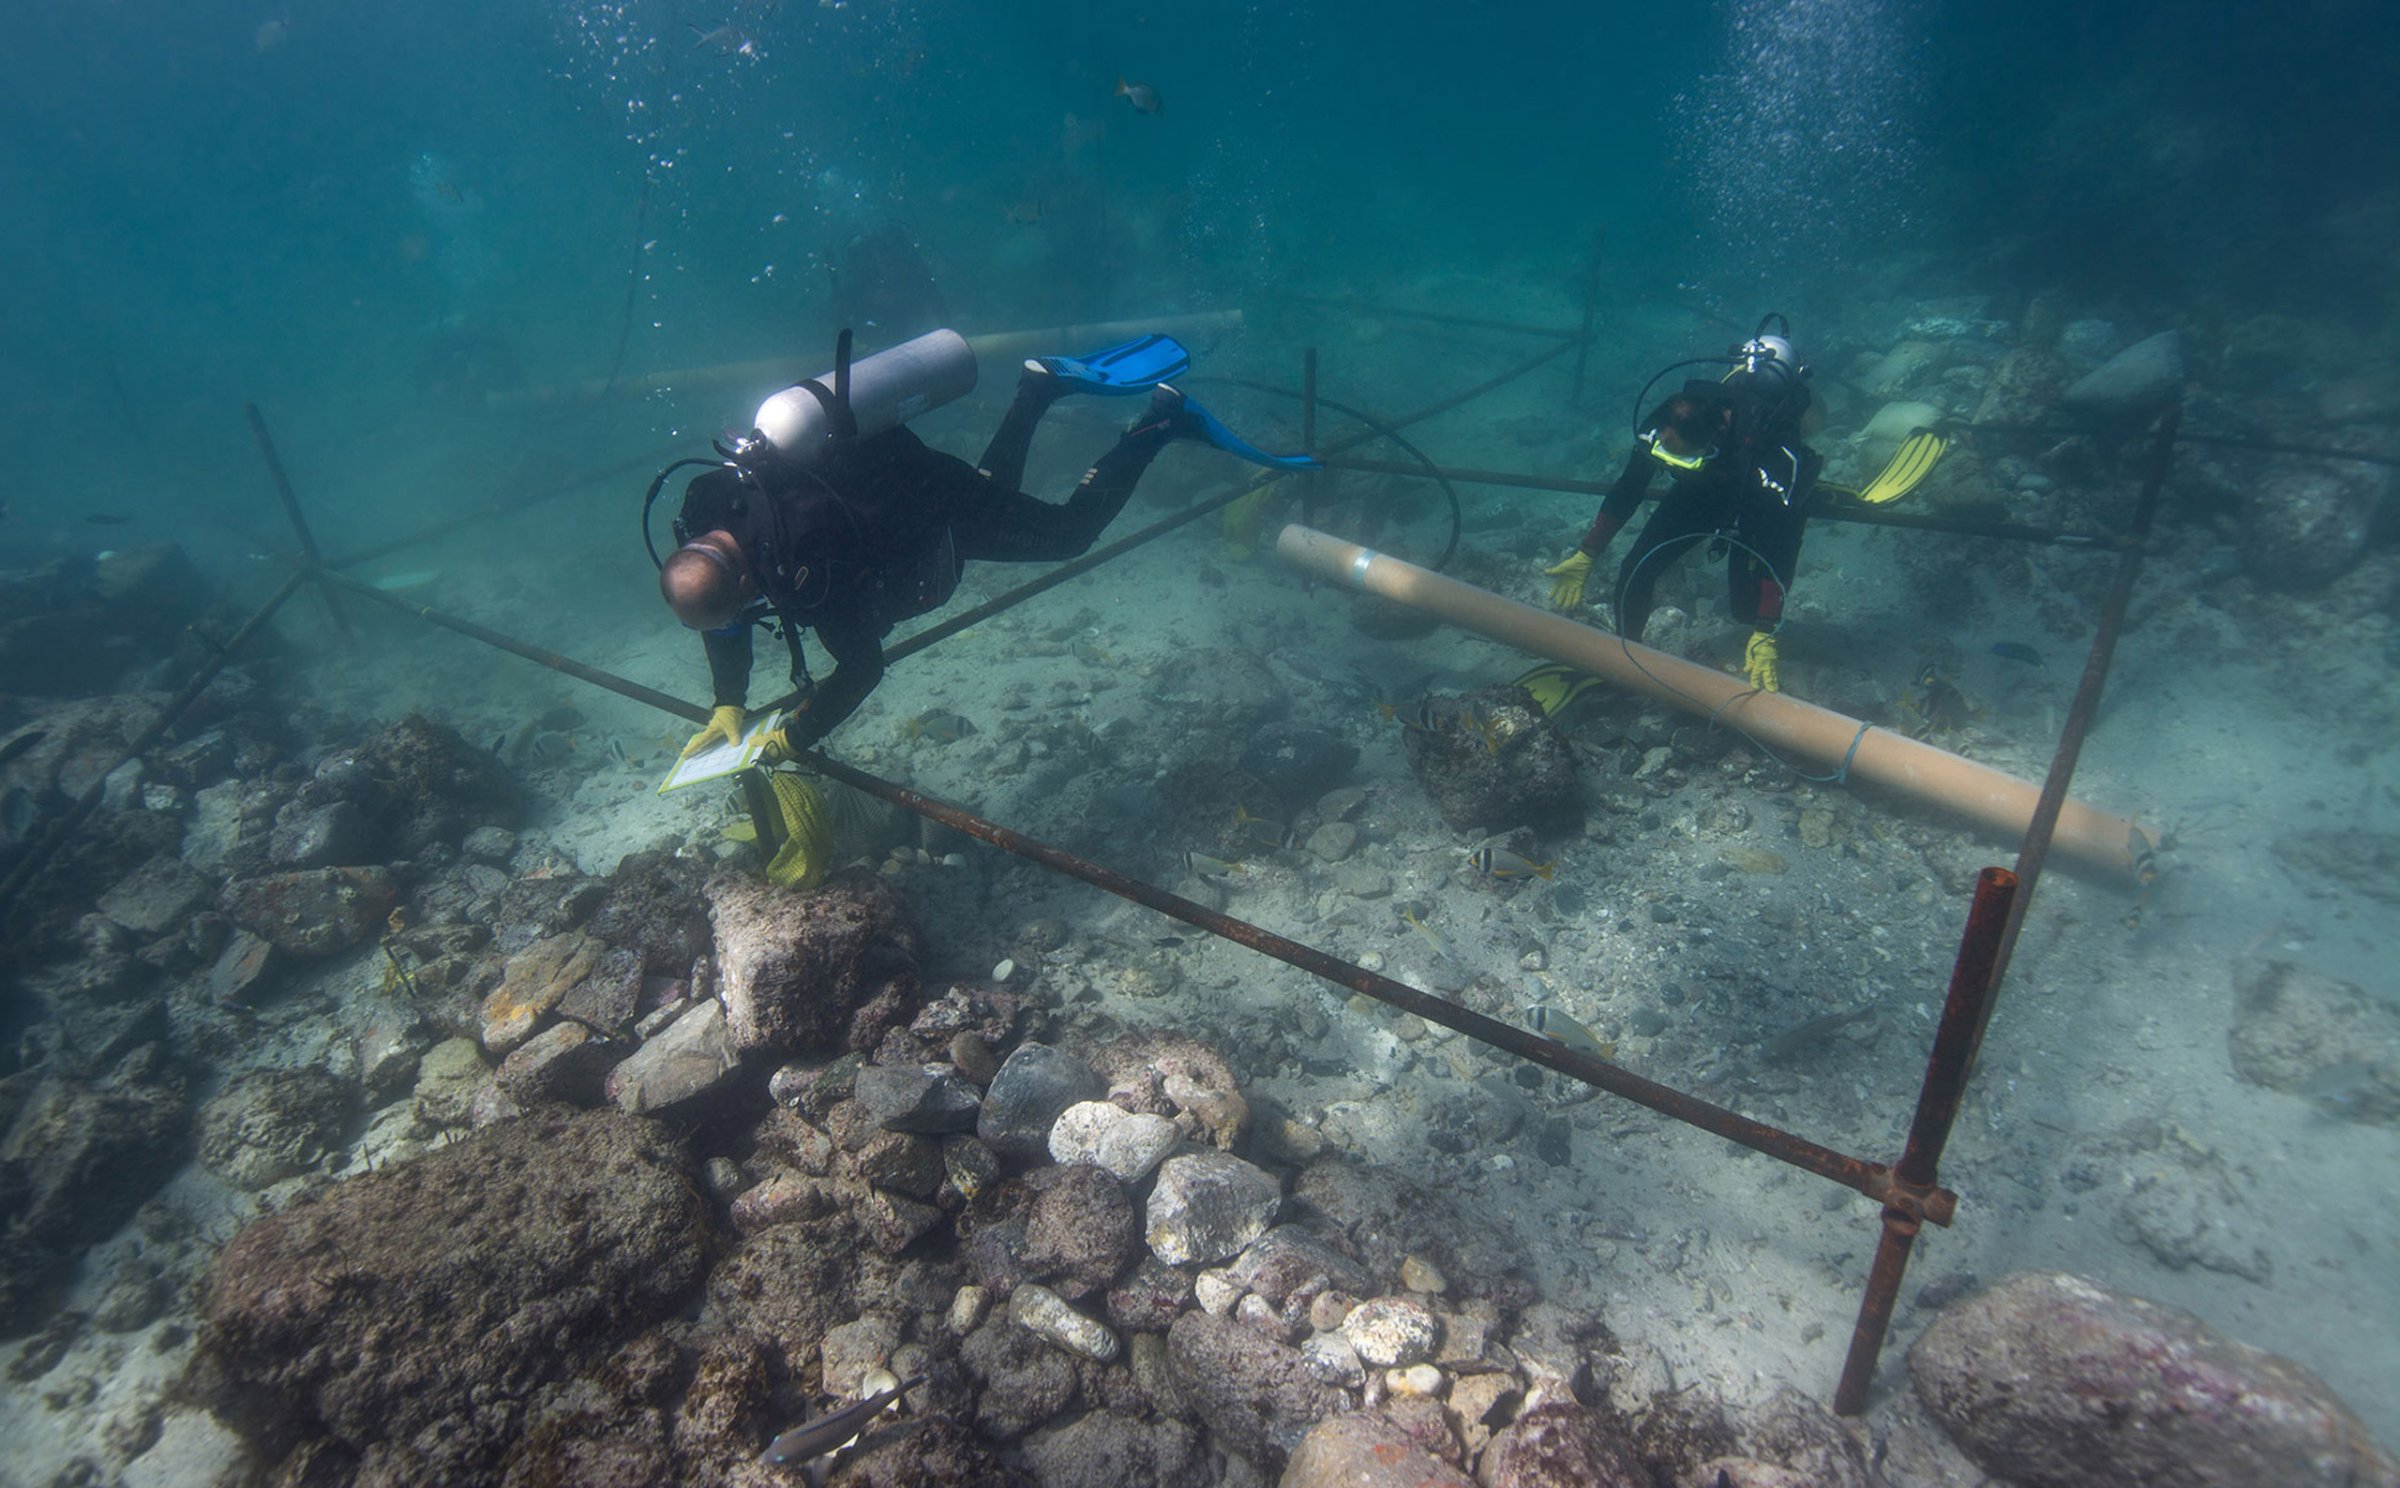 In this undated photo made available by Blue Water Recoveries company on Tuesday, March 15, 2016, divers excavate the wreck site of the Portuguese explorer Vasco da Gama's ship, Esmeralda which sank in a storm in May 1503 off the coast of Al Hallaniyah island in Oman's Dhofar region. (Blue Water Recoveries company via AP)